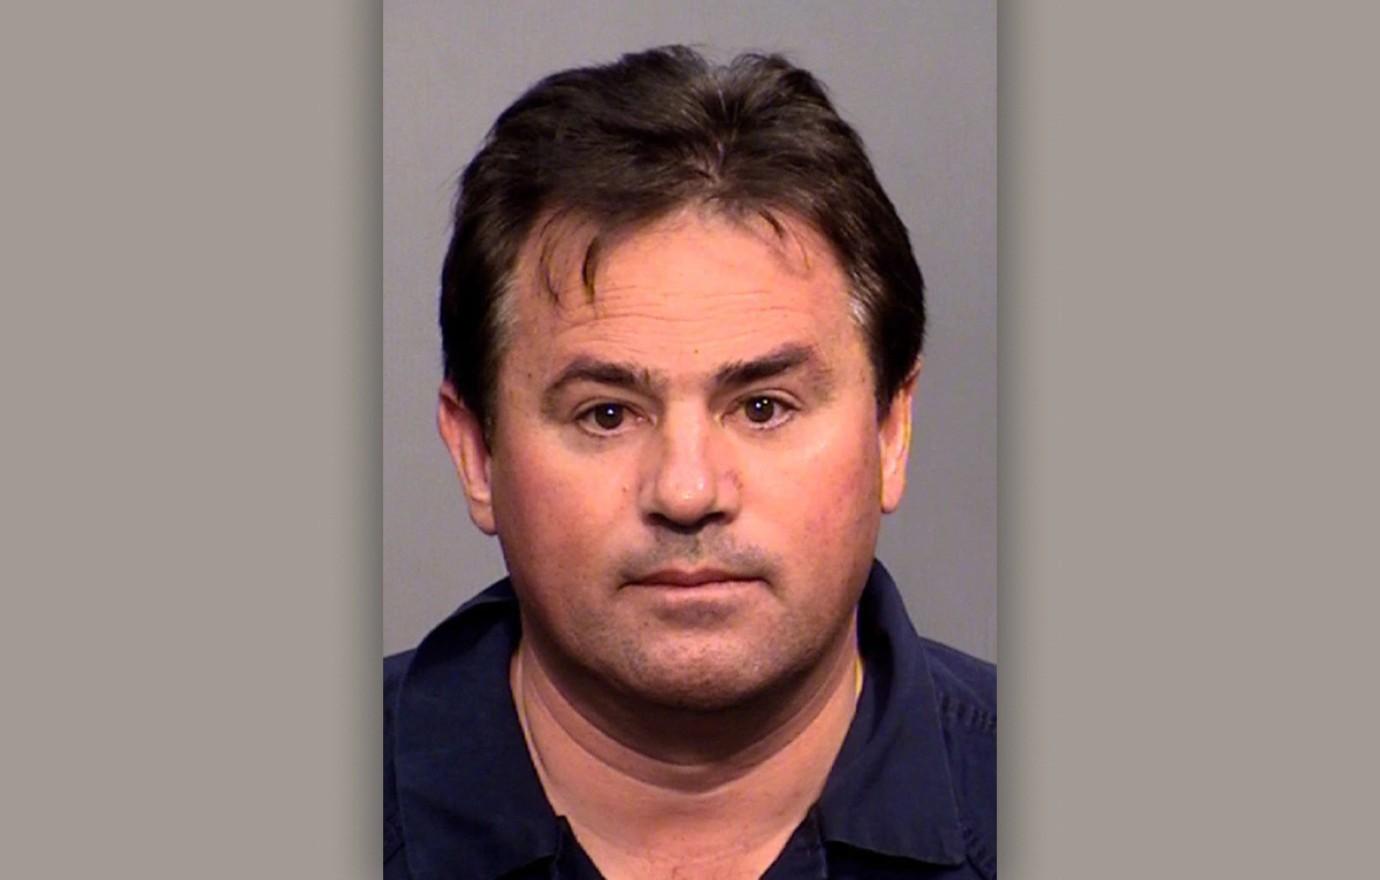 Polygamist Cult Leader Samuel Bateman Indicted For Sexually Abusing Girls He Claimed As Wives pic